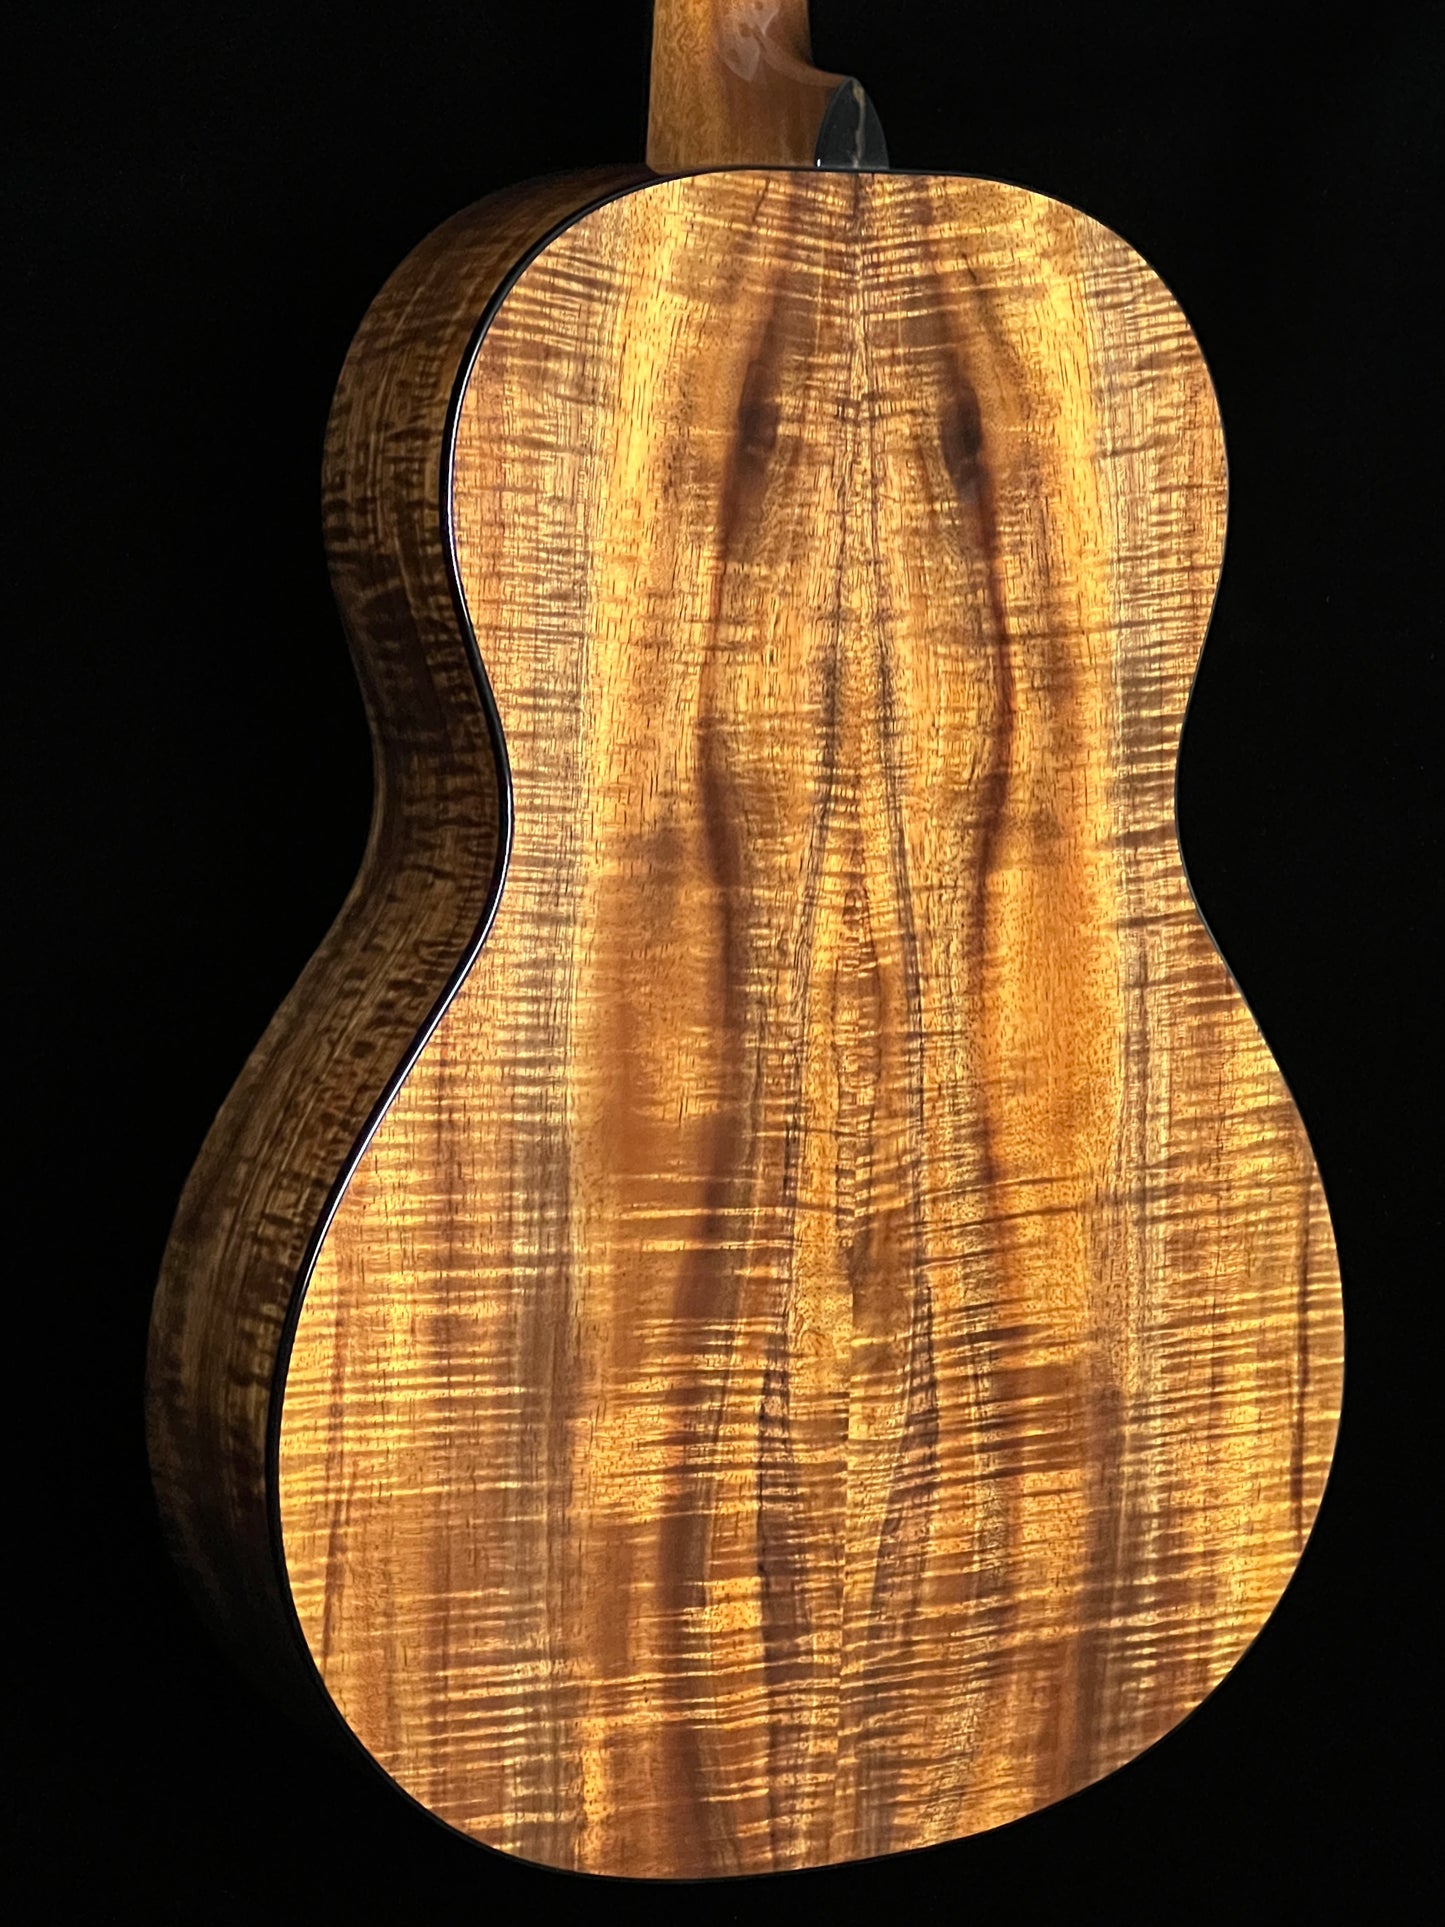 Bedell Pele Parlor Koa Limited Edition Acoustic Guitar #2 out of 12 - Consignment